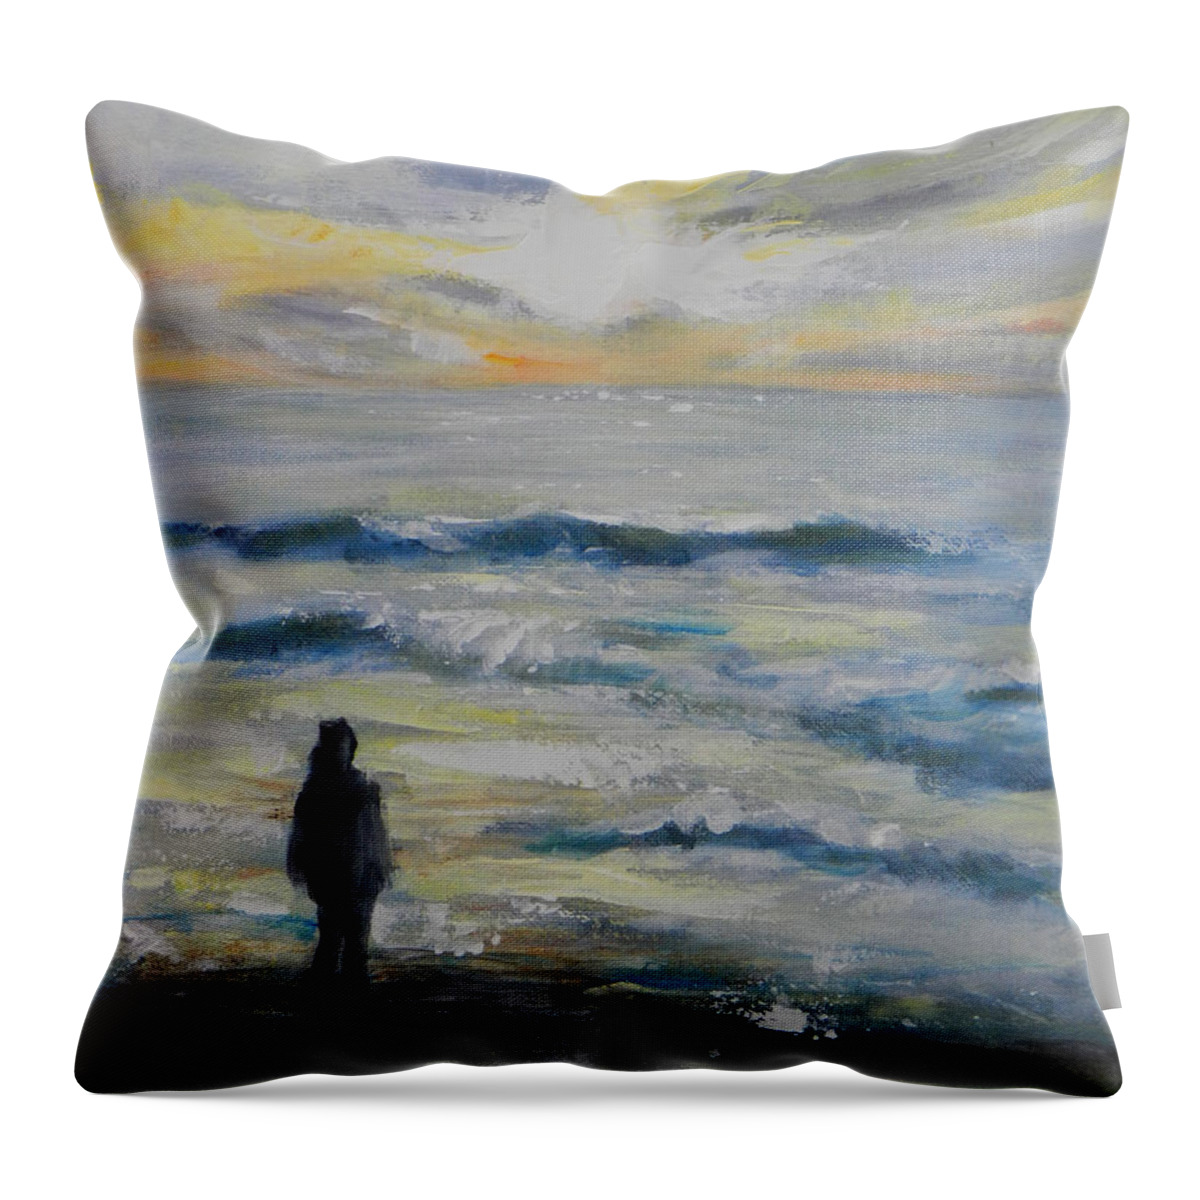 Ocean Throw Pillow featuring the painting Leah making wish at sunset by Deborah Ferree